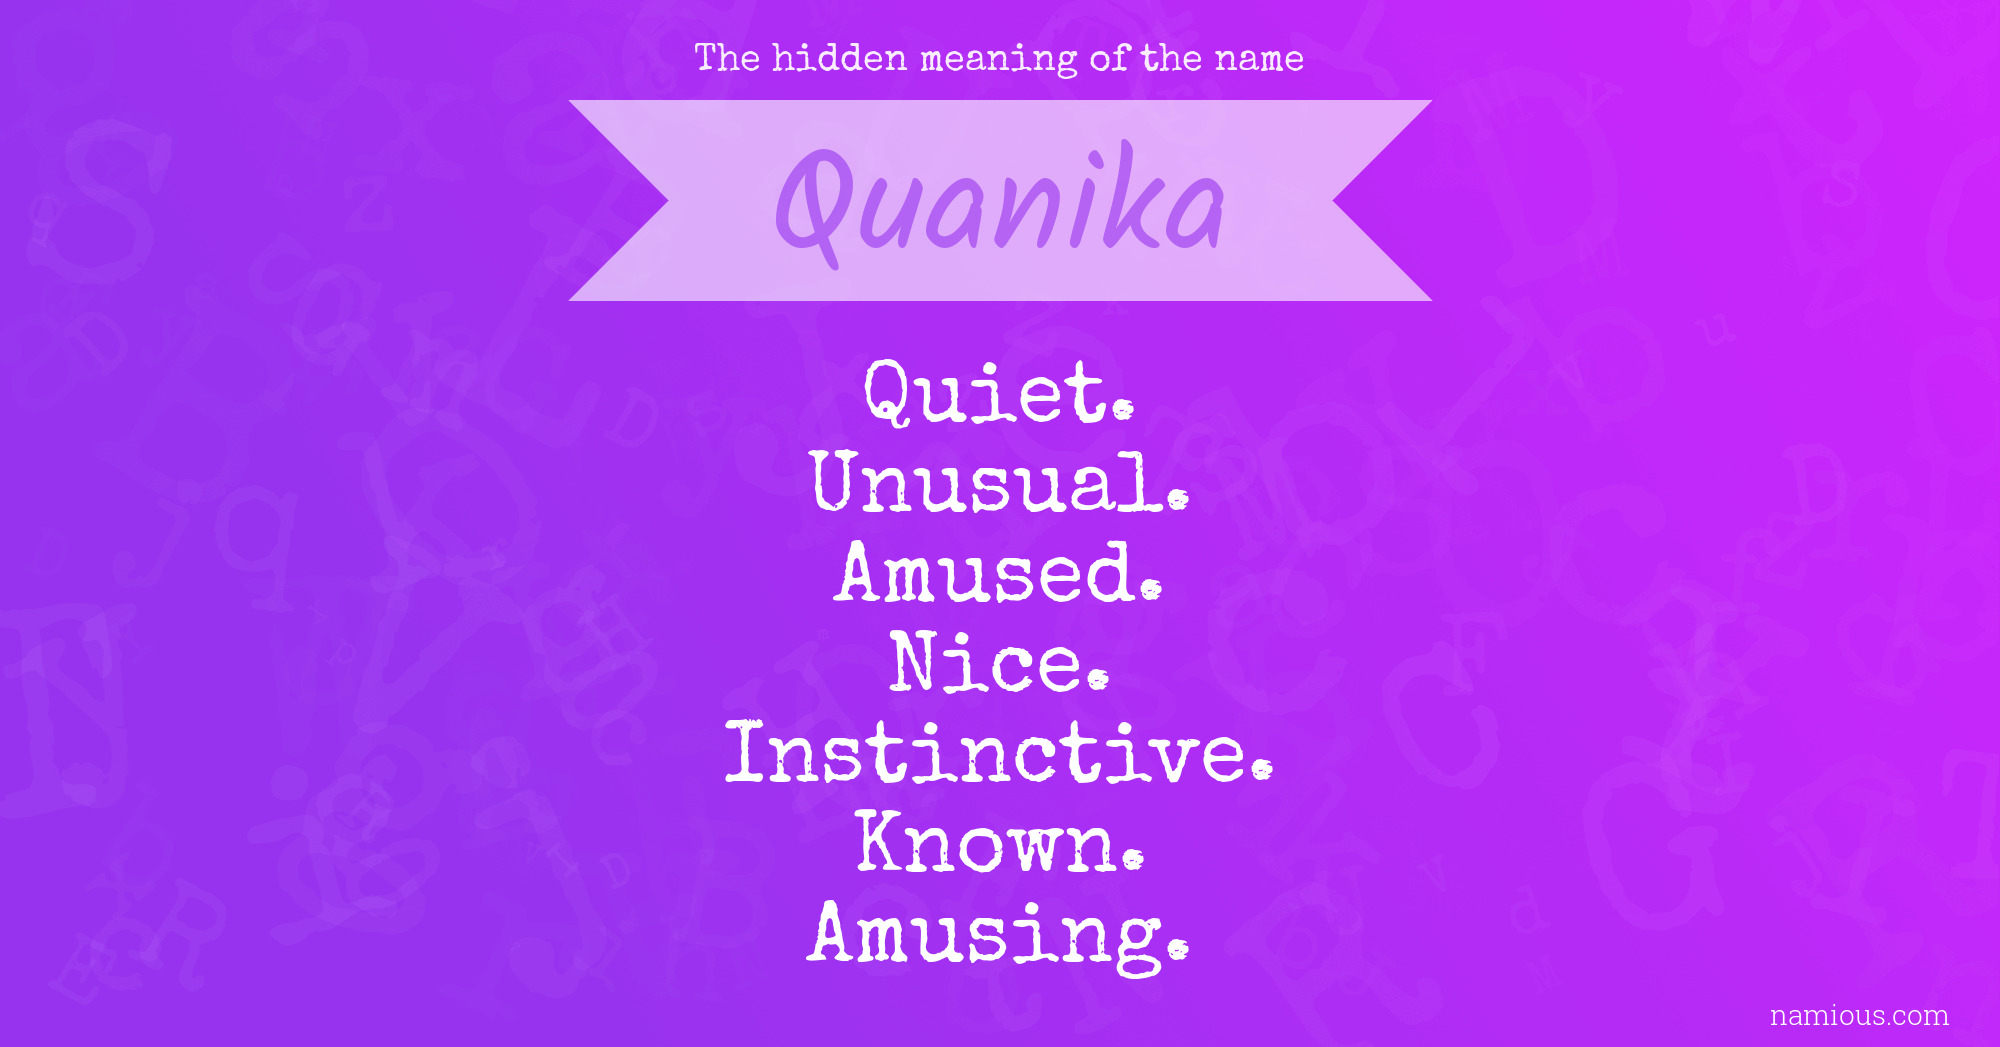 The hidden meaning of the name Quanika